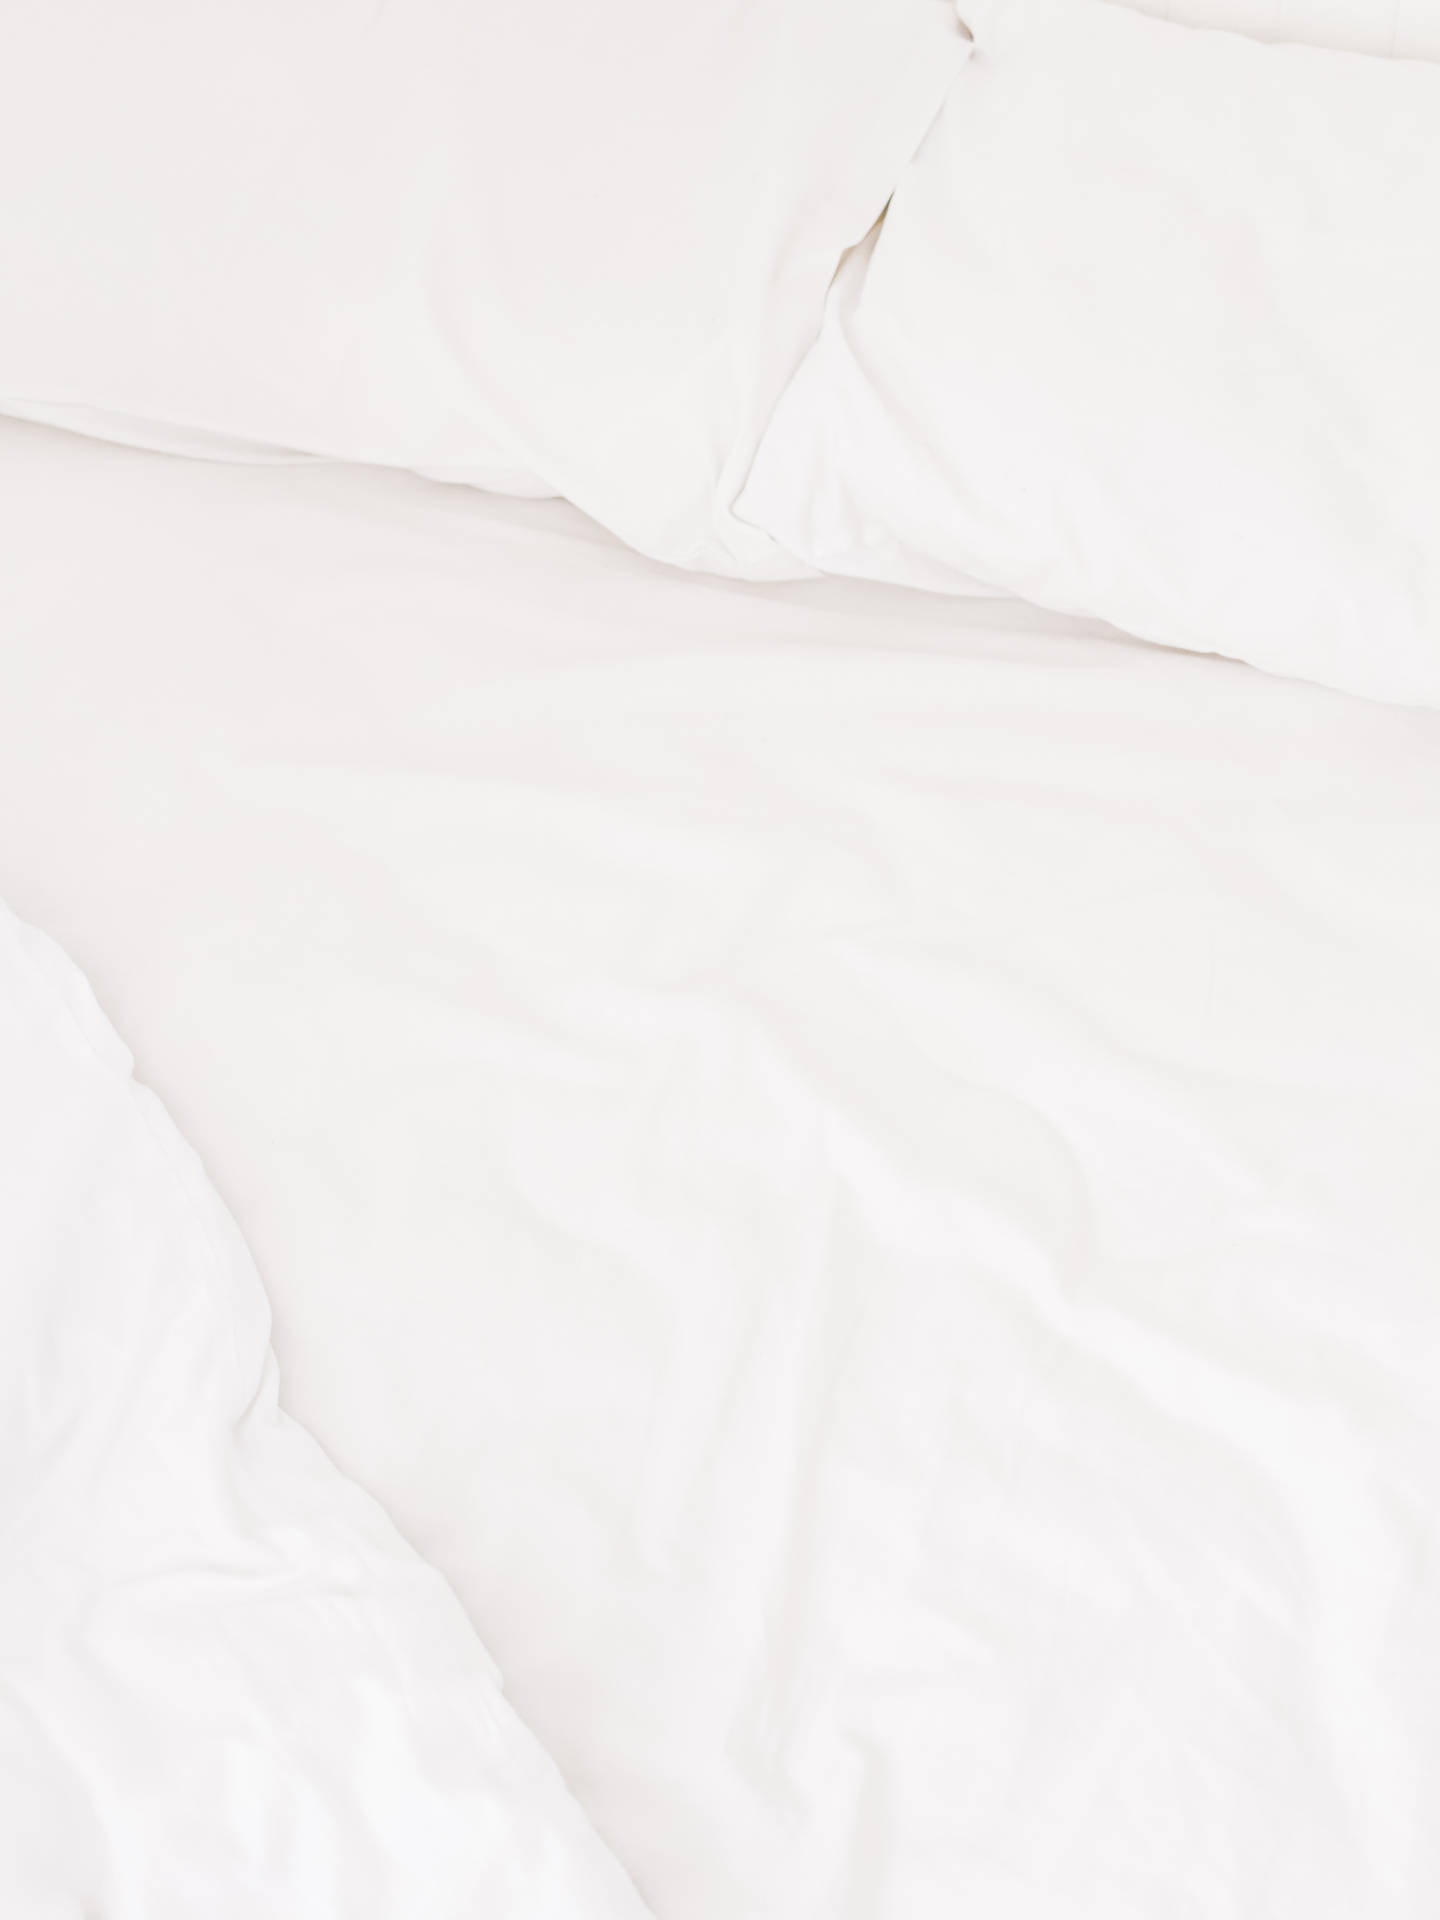 Simple White Aesthetic Empty Bed